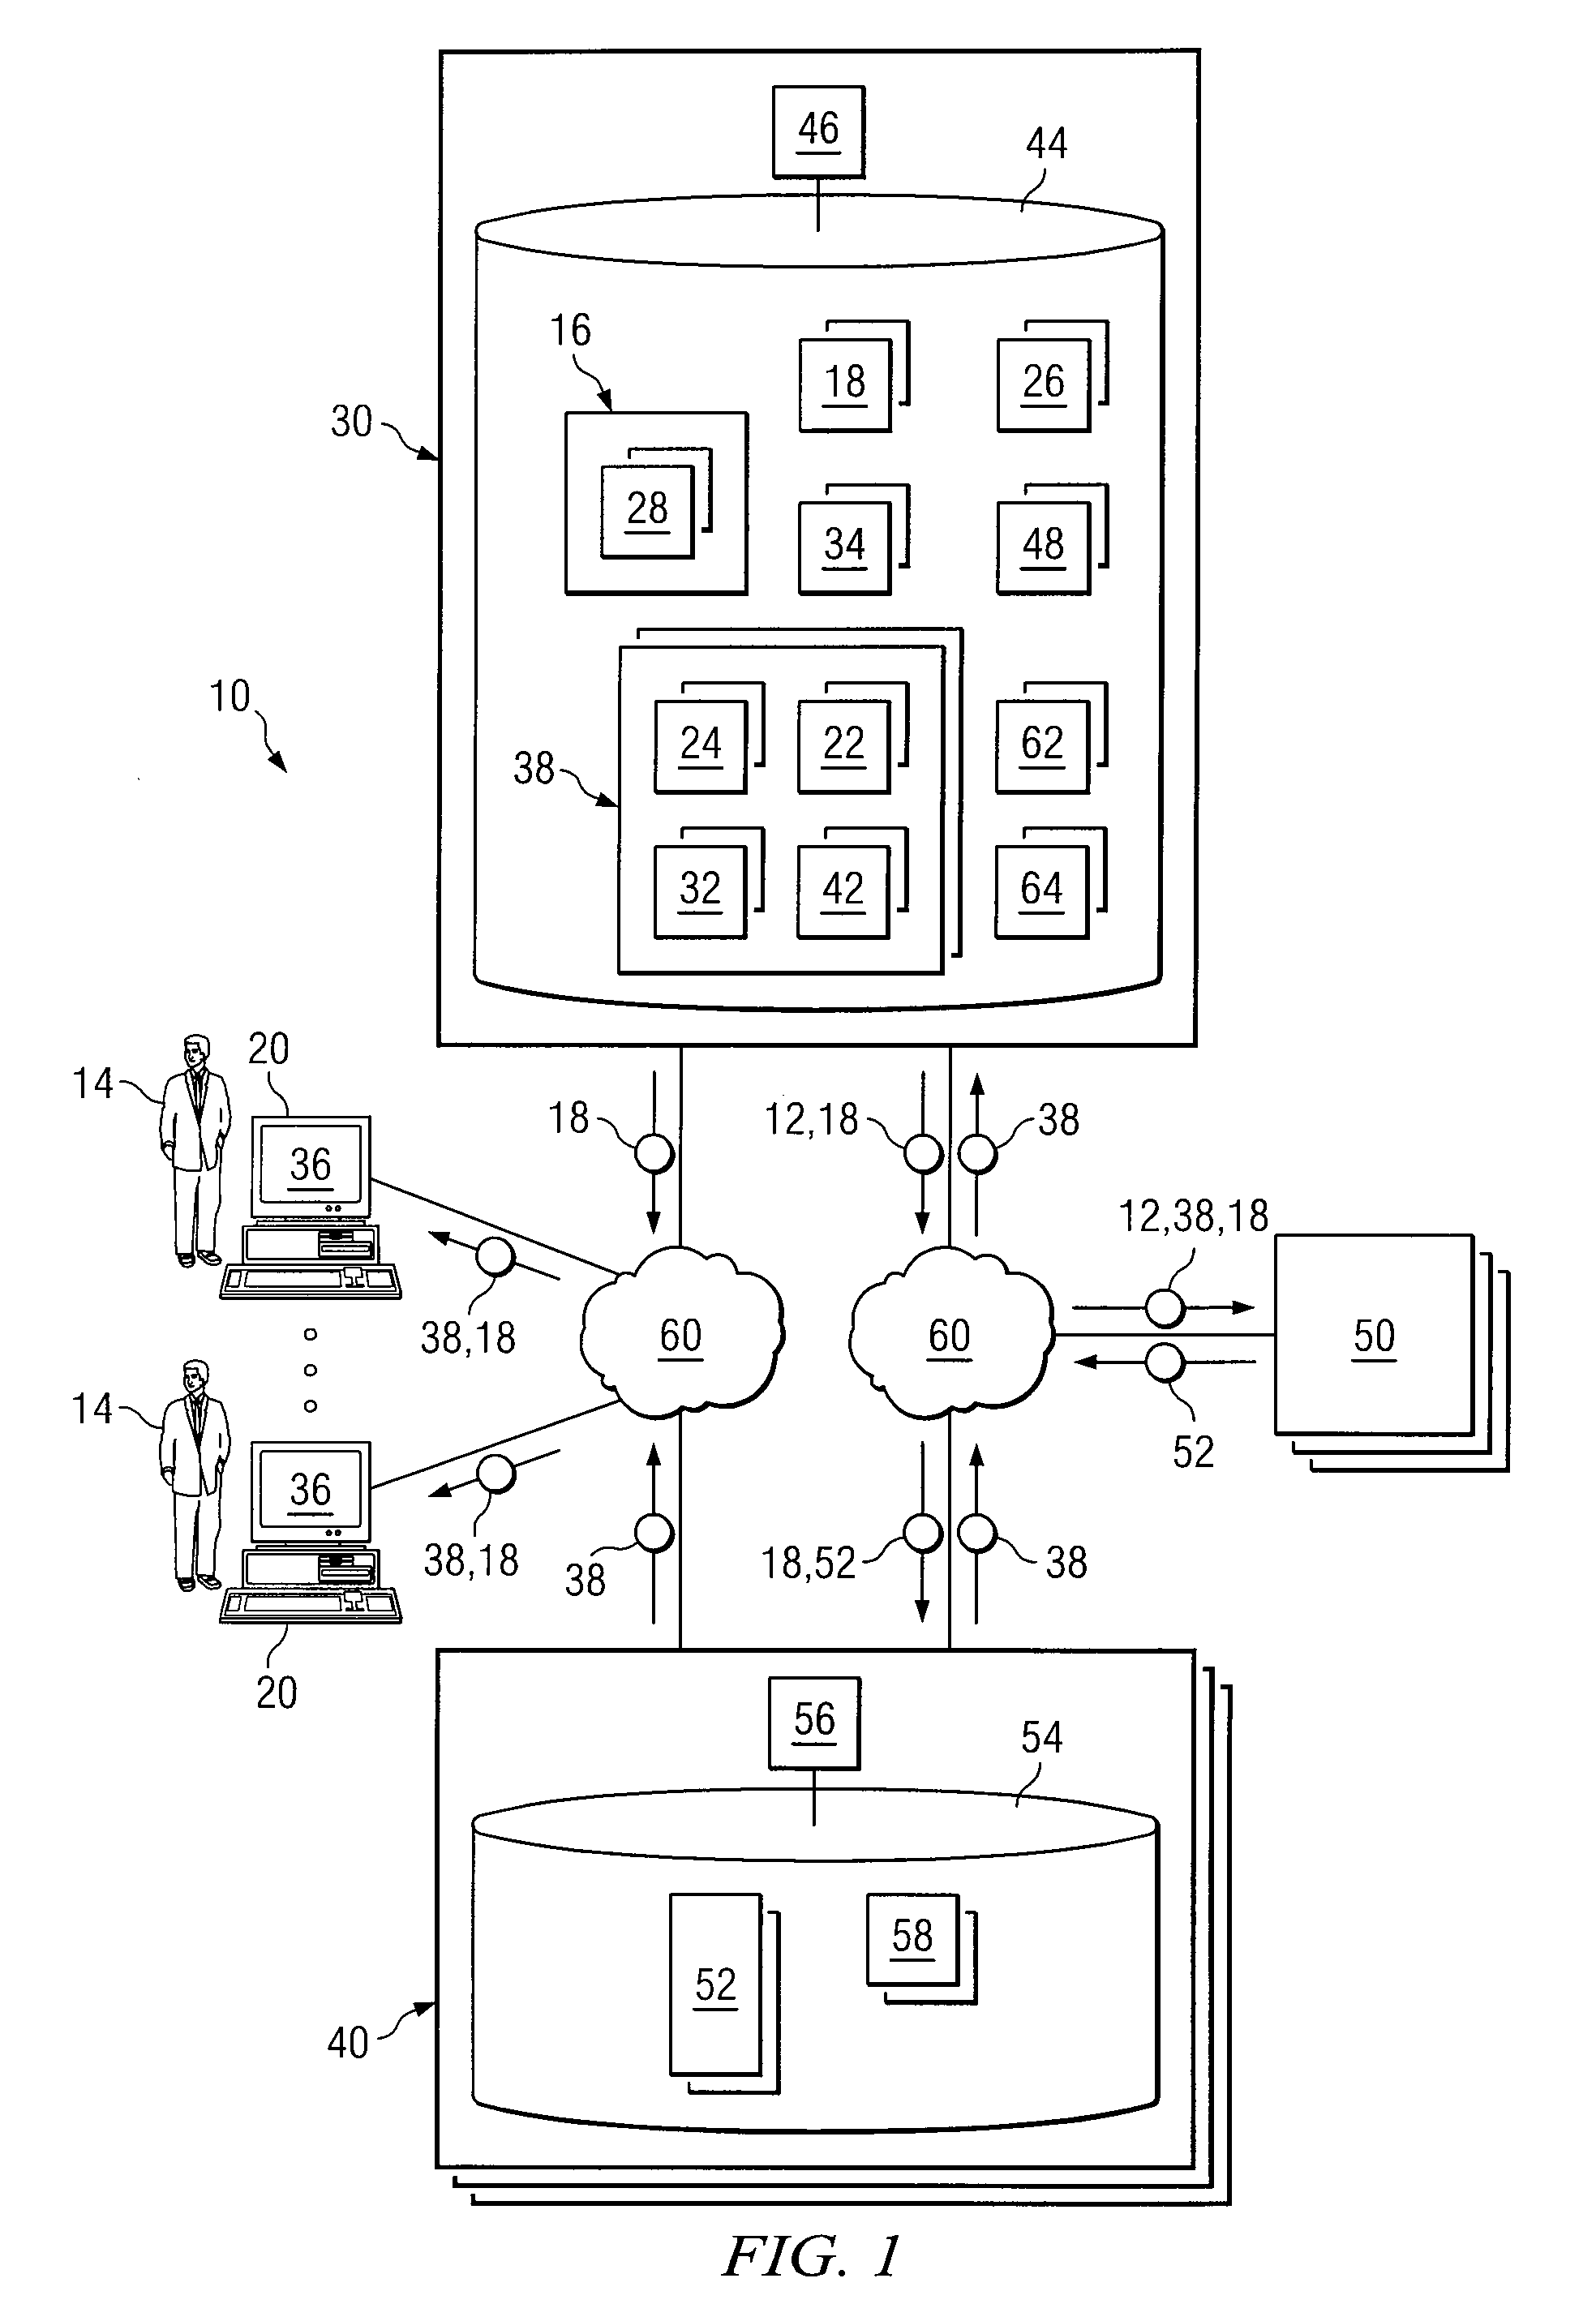 System and Method for Providing a Trading System Comprising a Compound Index